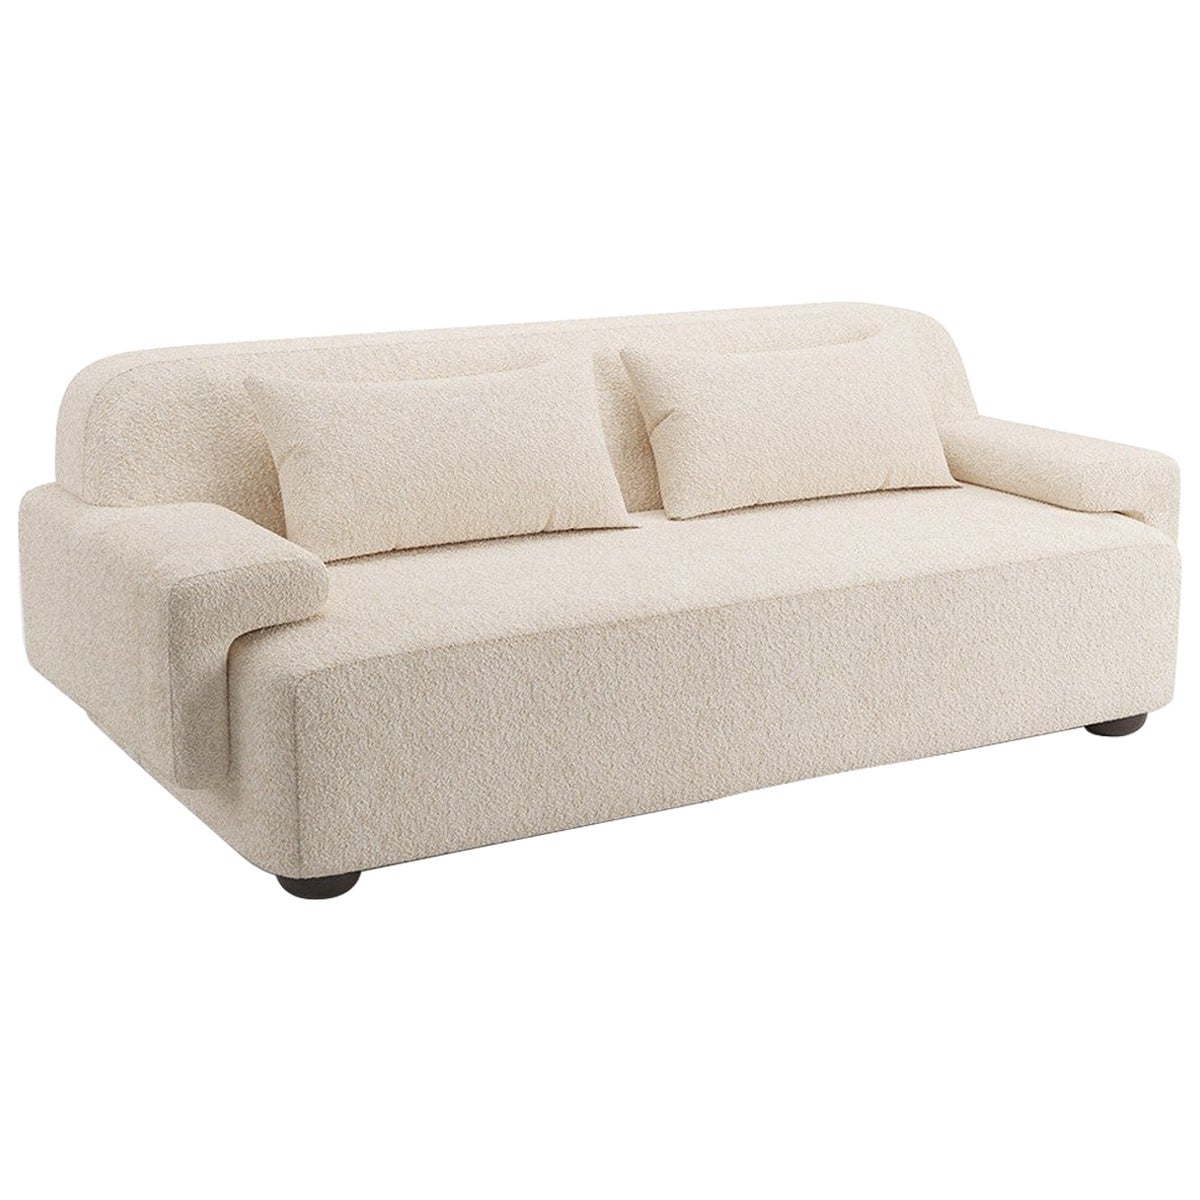 Popus Editions Lena 4 Seater Sofa in Natural Athena Loop Yarn Upholstery